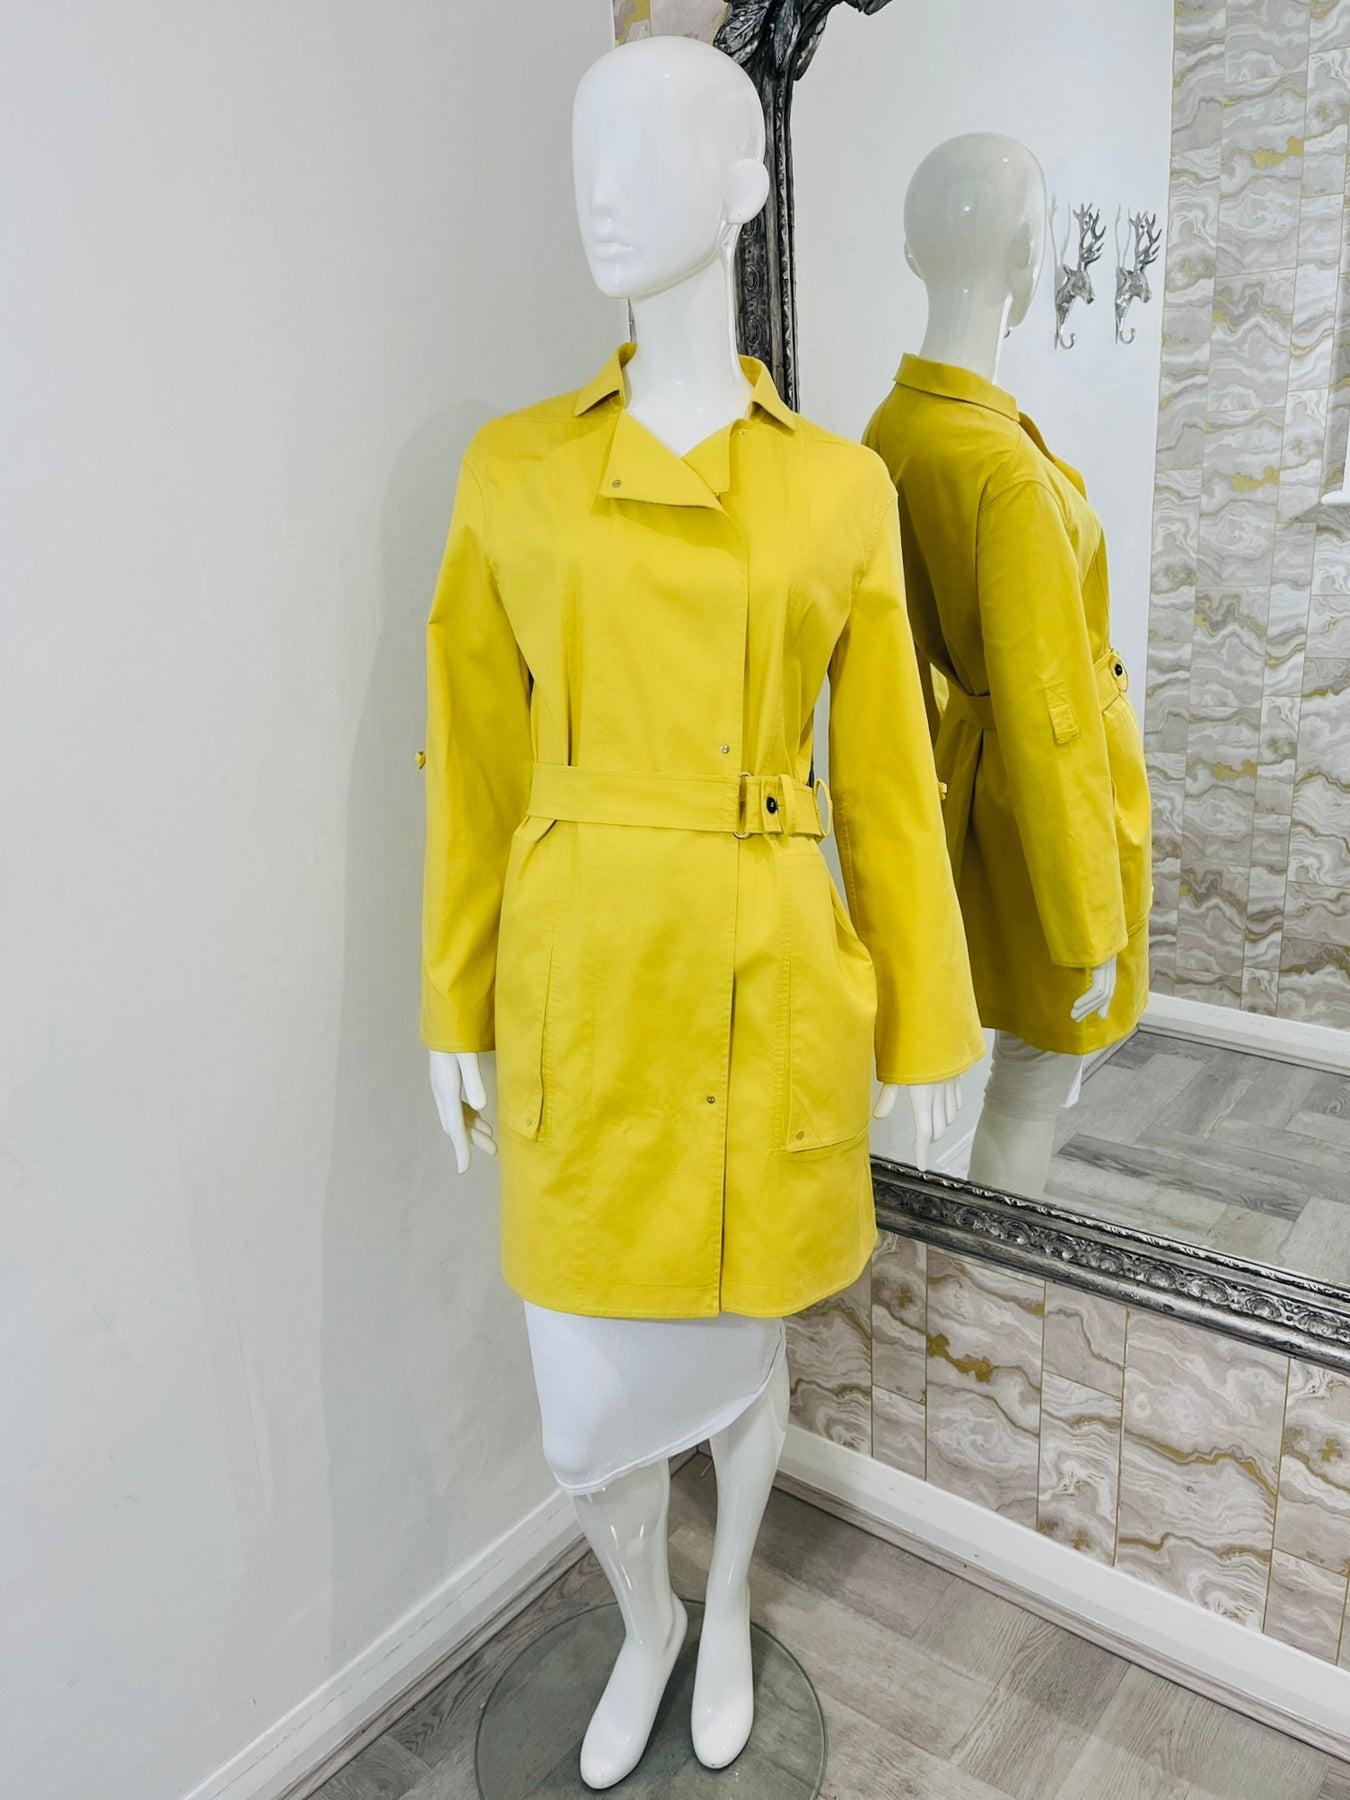 Hermes Cotton Trench Coat

Yellow coat embellished with a d-ring belted waist. Features oversized front pockets and side snap closure. Classic collar and mid thigh length.

Additional information:
Size- 42FR
Composition- 97% Cotton, 3%